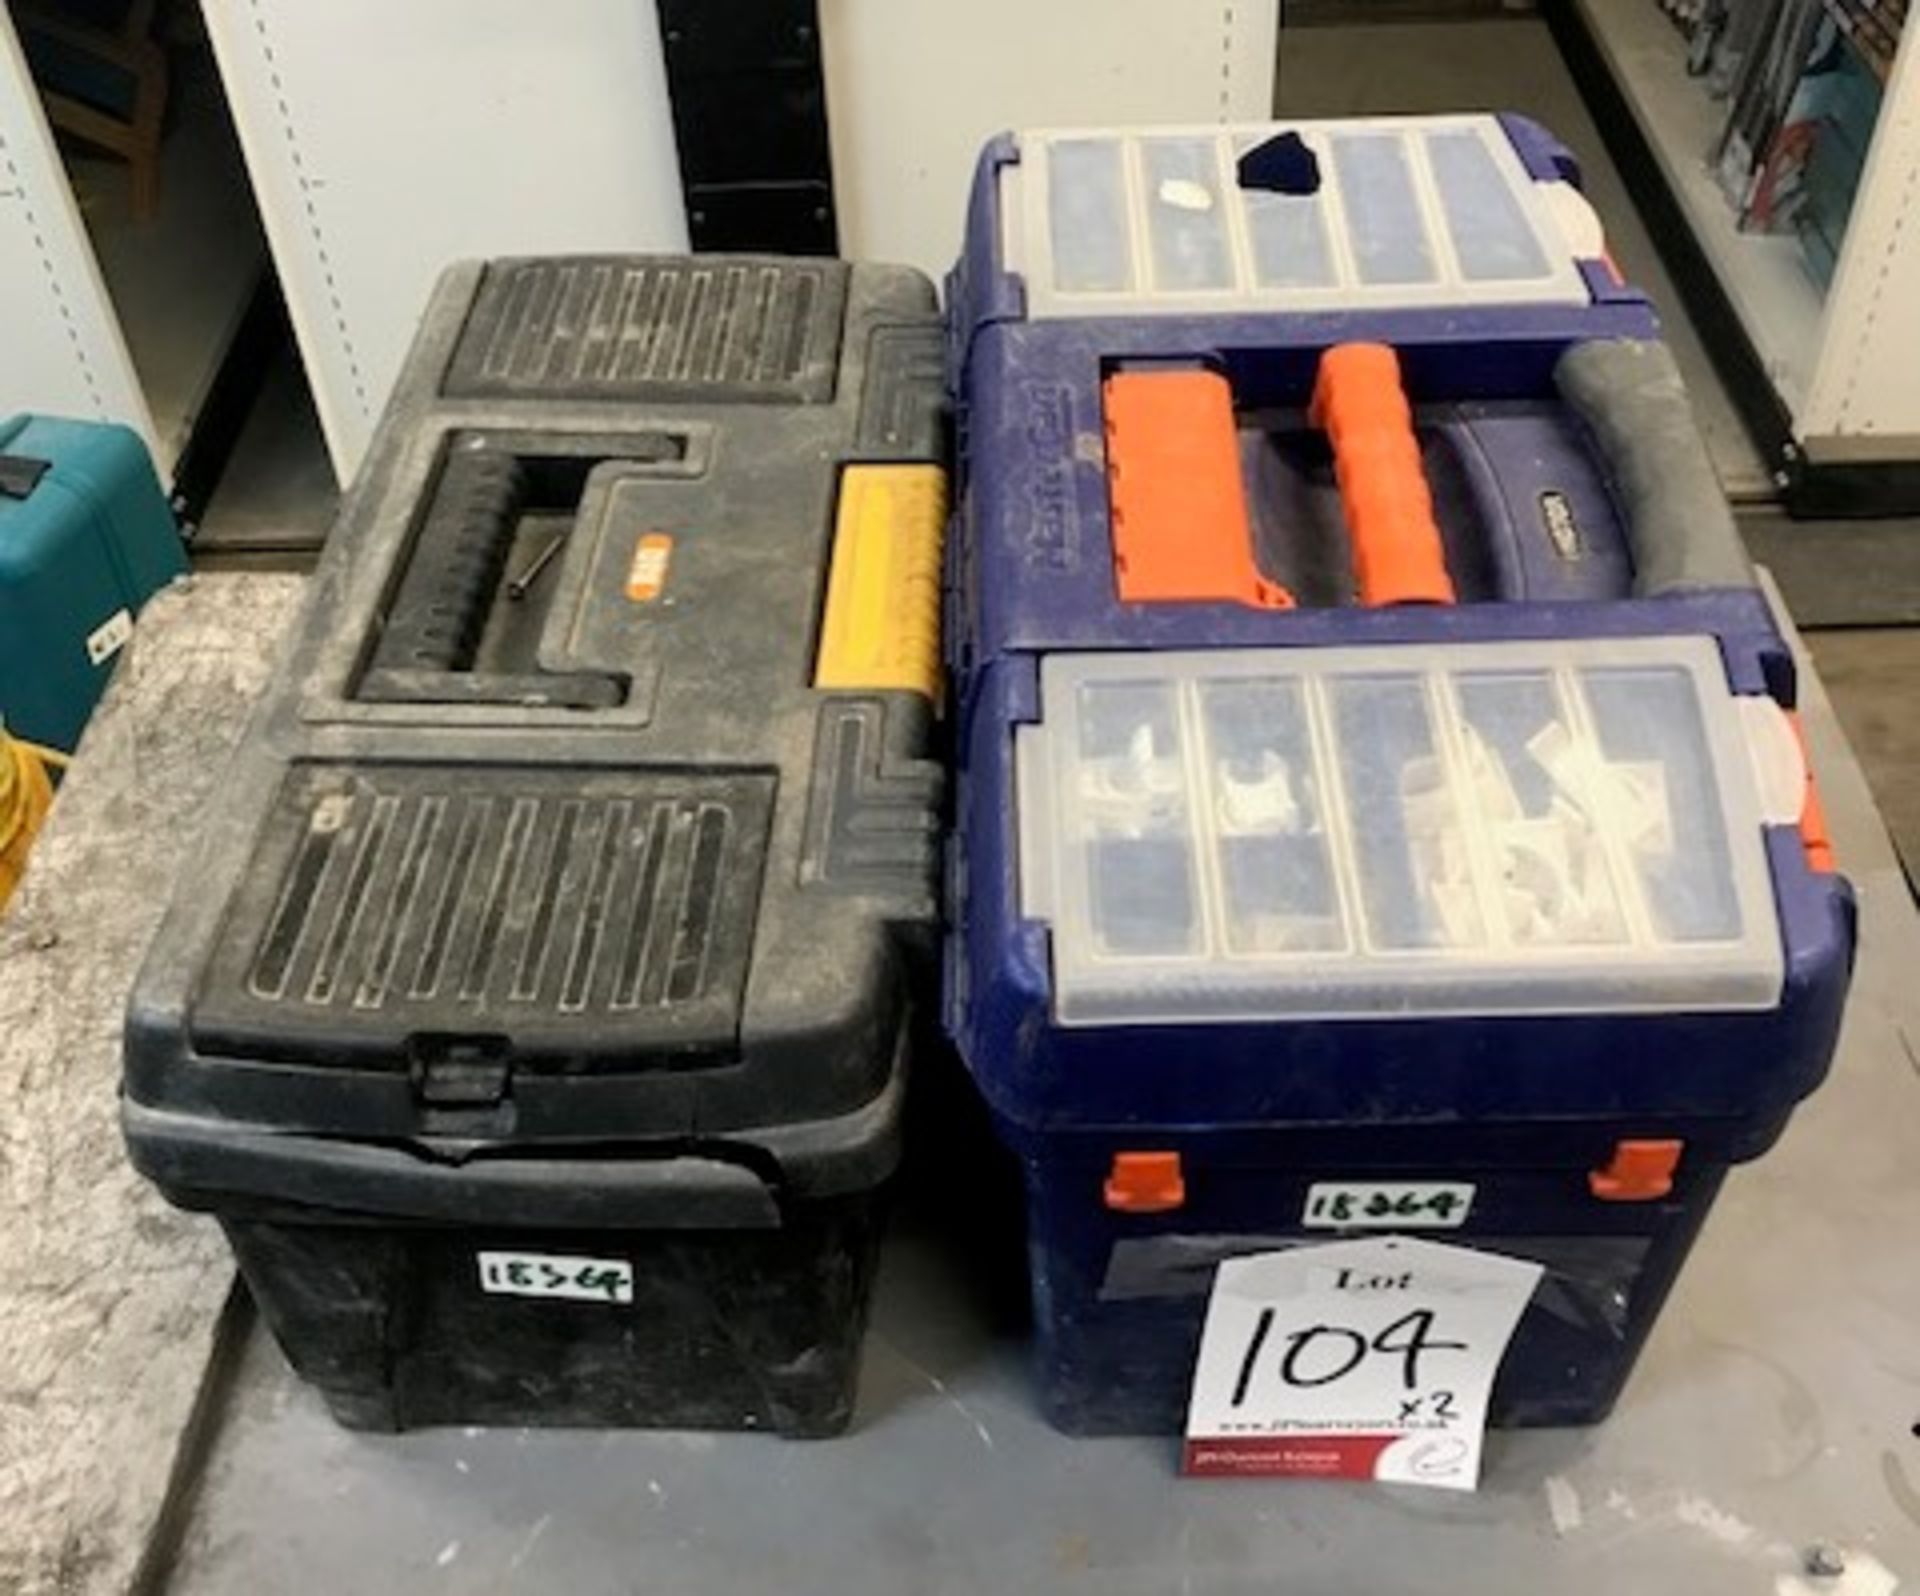 2 x Tools Cases w/ Contents as Pictured